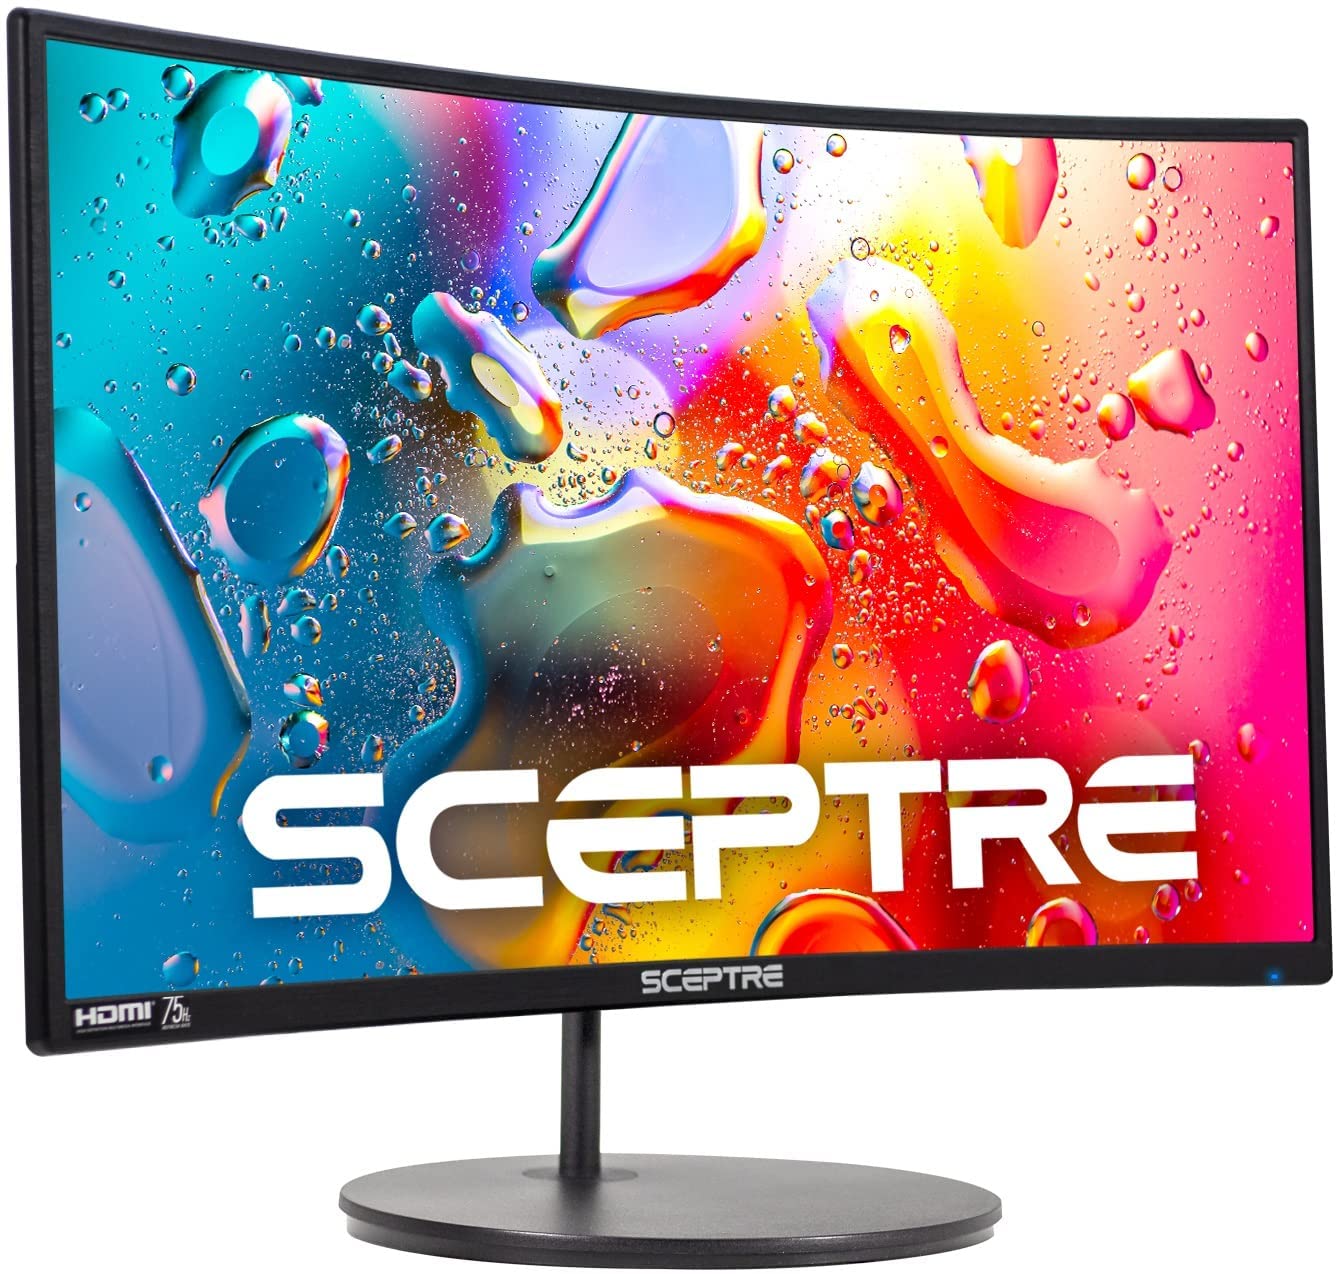 Sceptre 24" Curved 75Hz Gaming LED Monitor Review